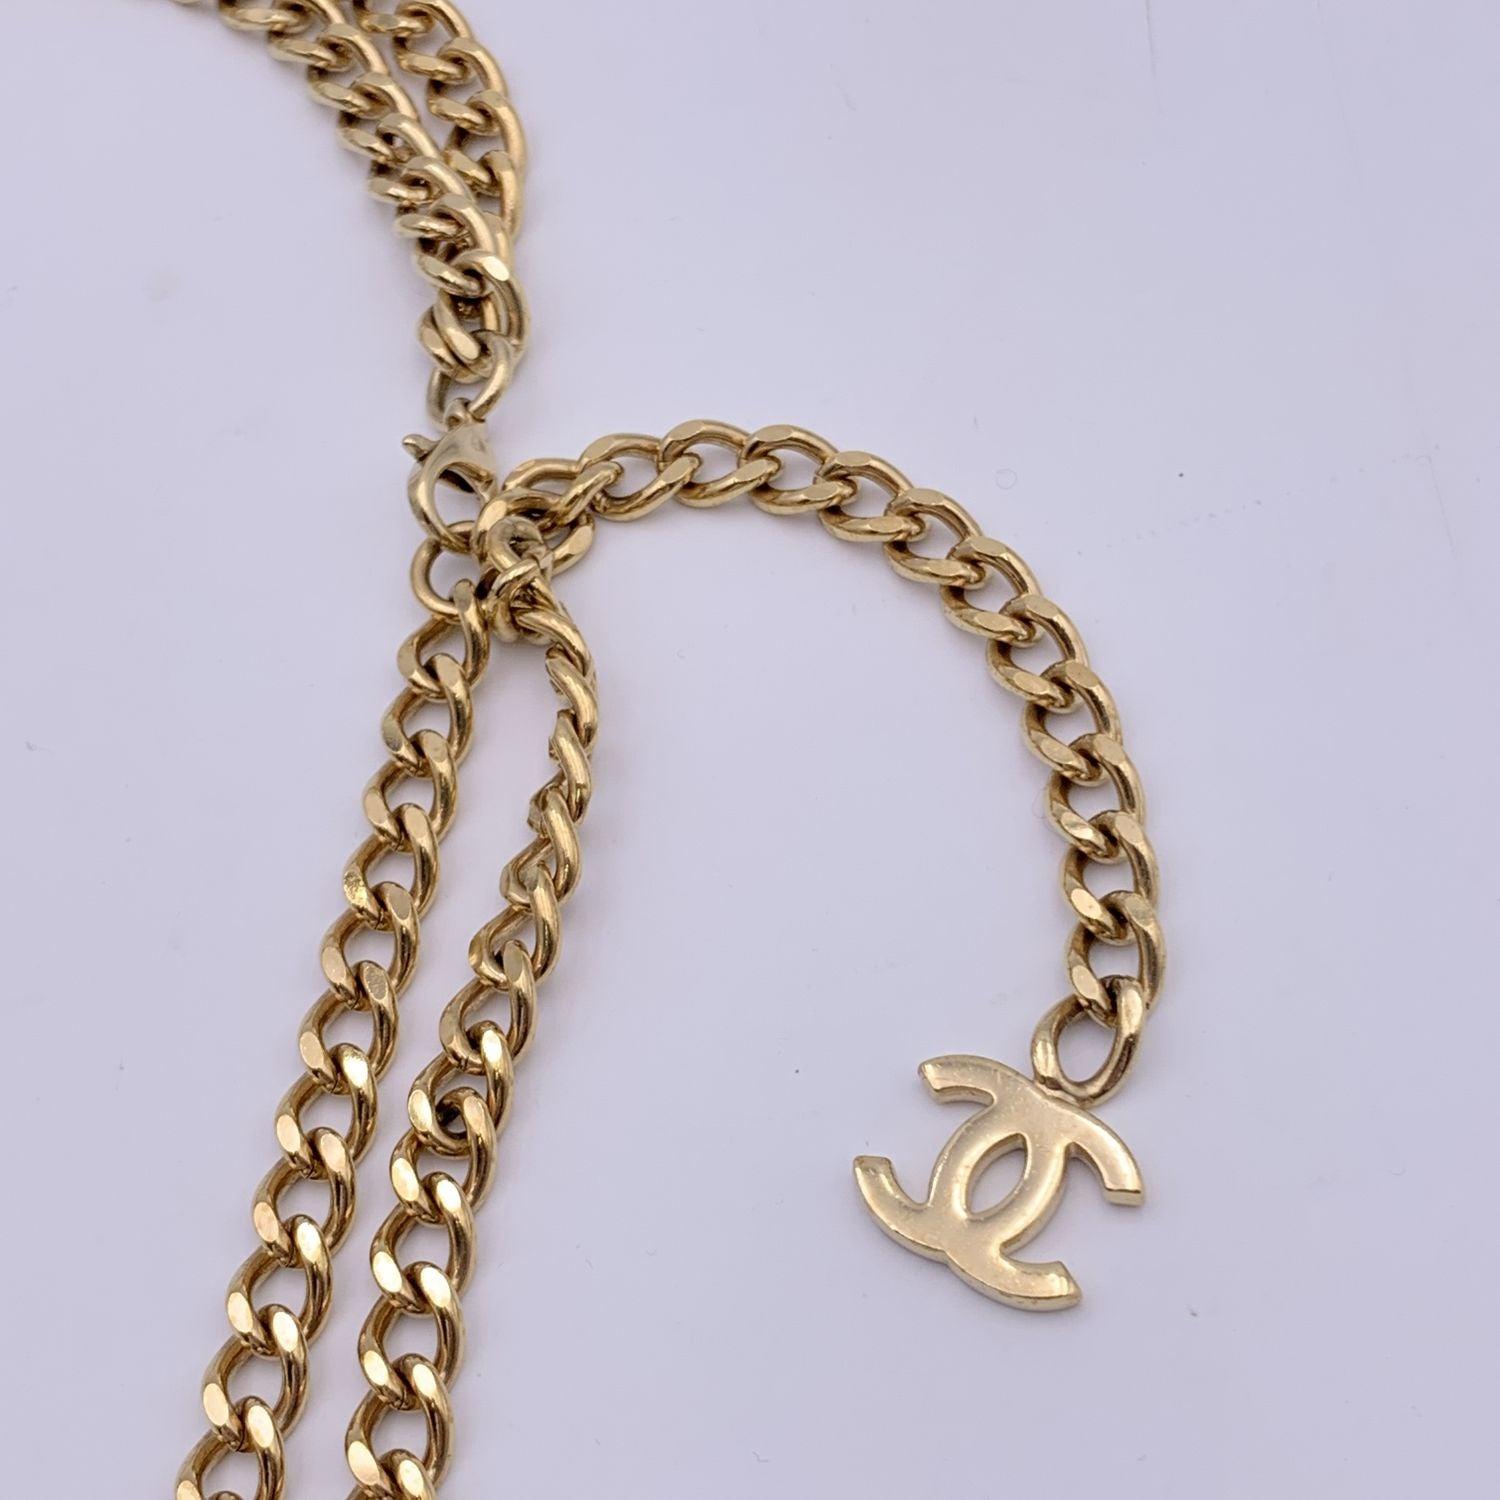 Women's Chanel Vintage Gold Metal Chain Coco Crystals Belt or Necklace